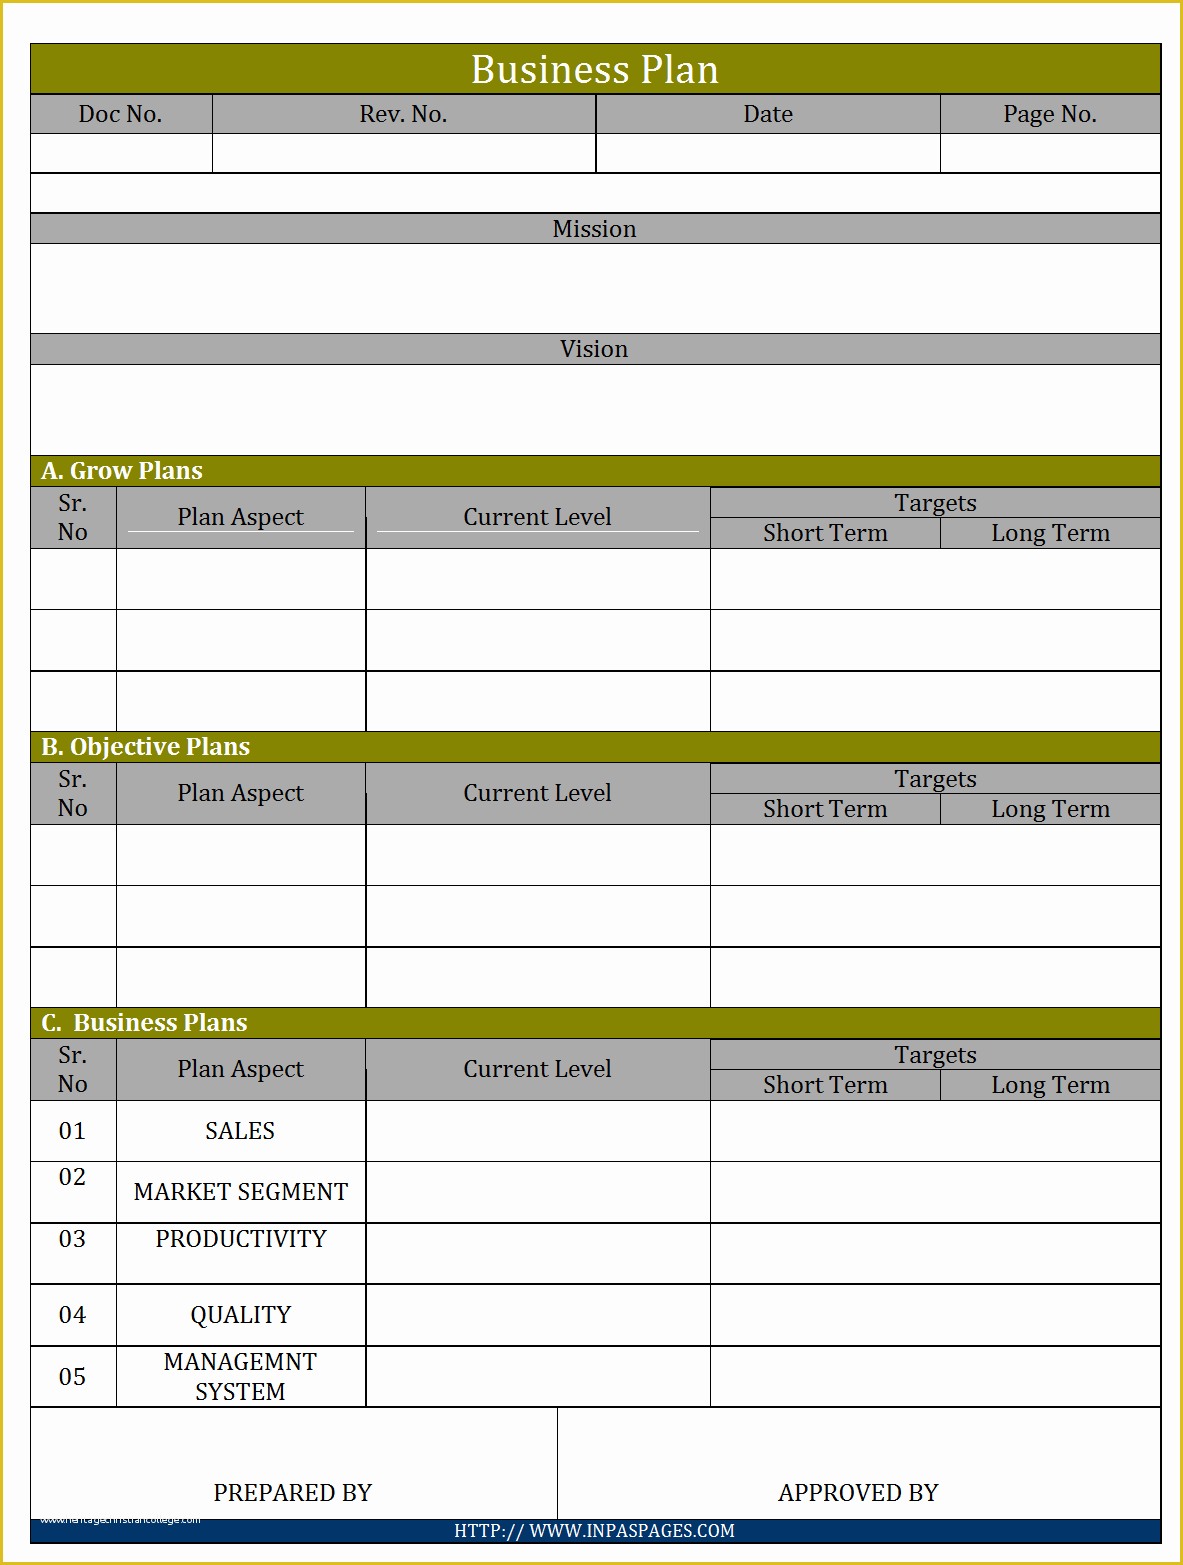 Business Plan Template Pdf Free Download Of Business Plan Template Pdf Free Download